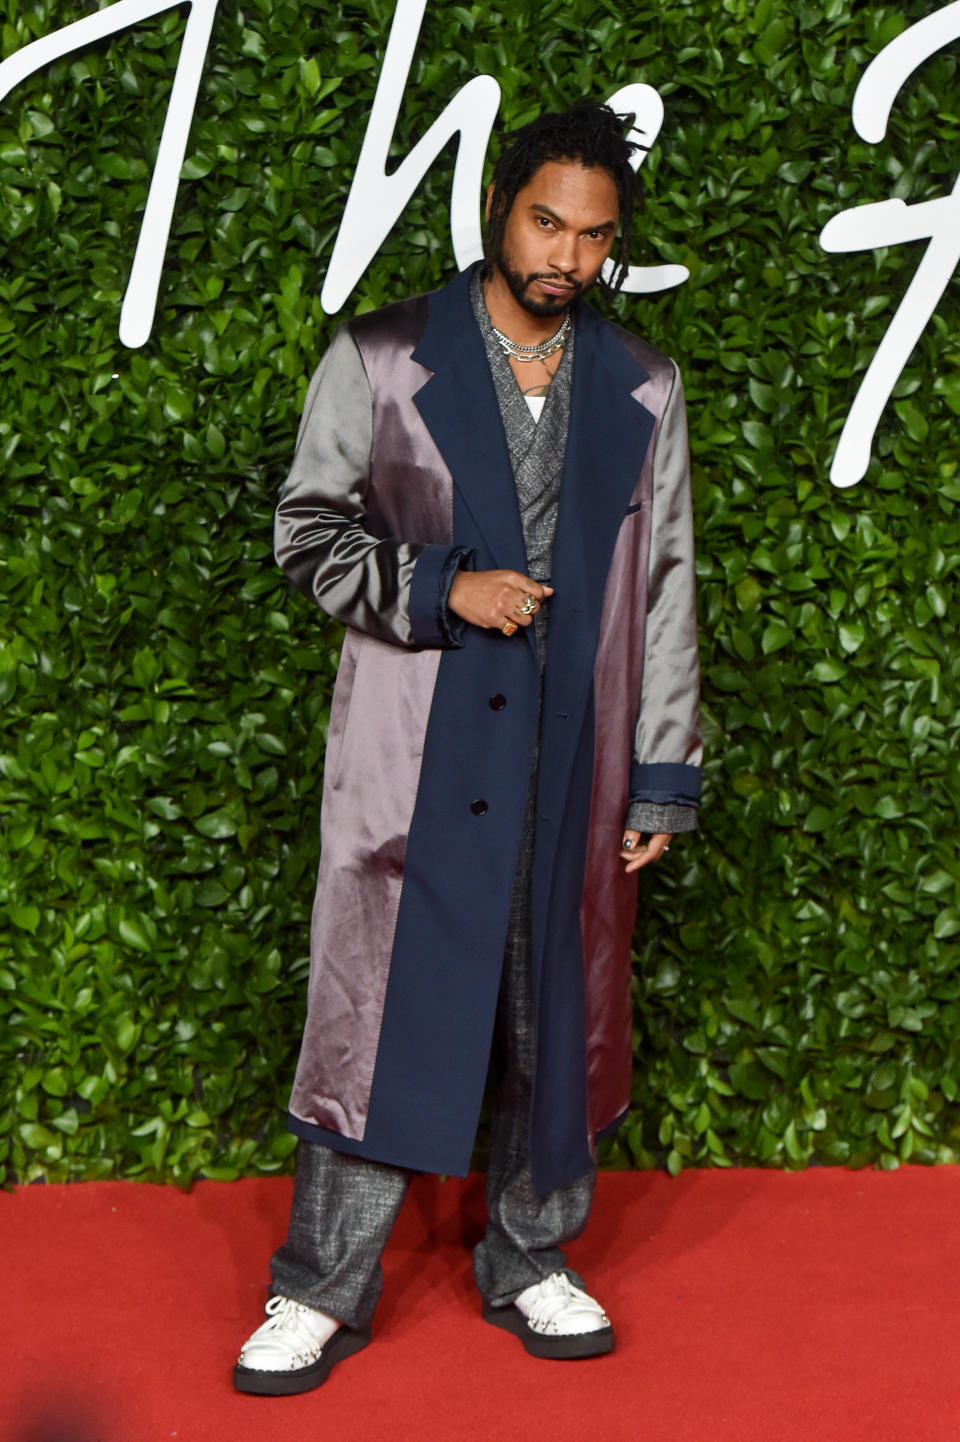 Miguel at the Fashion Awards in London on Dec. 2.